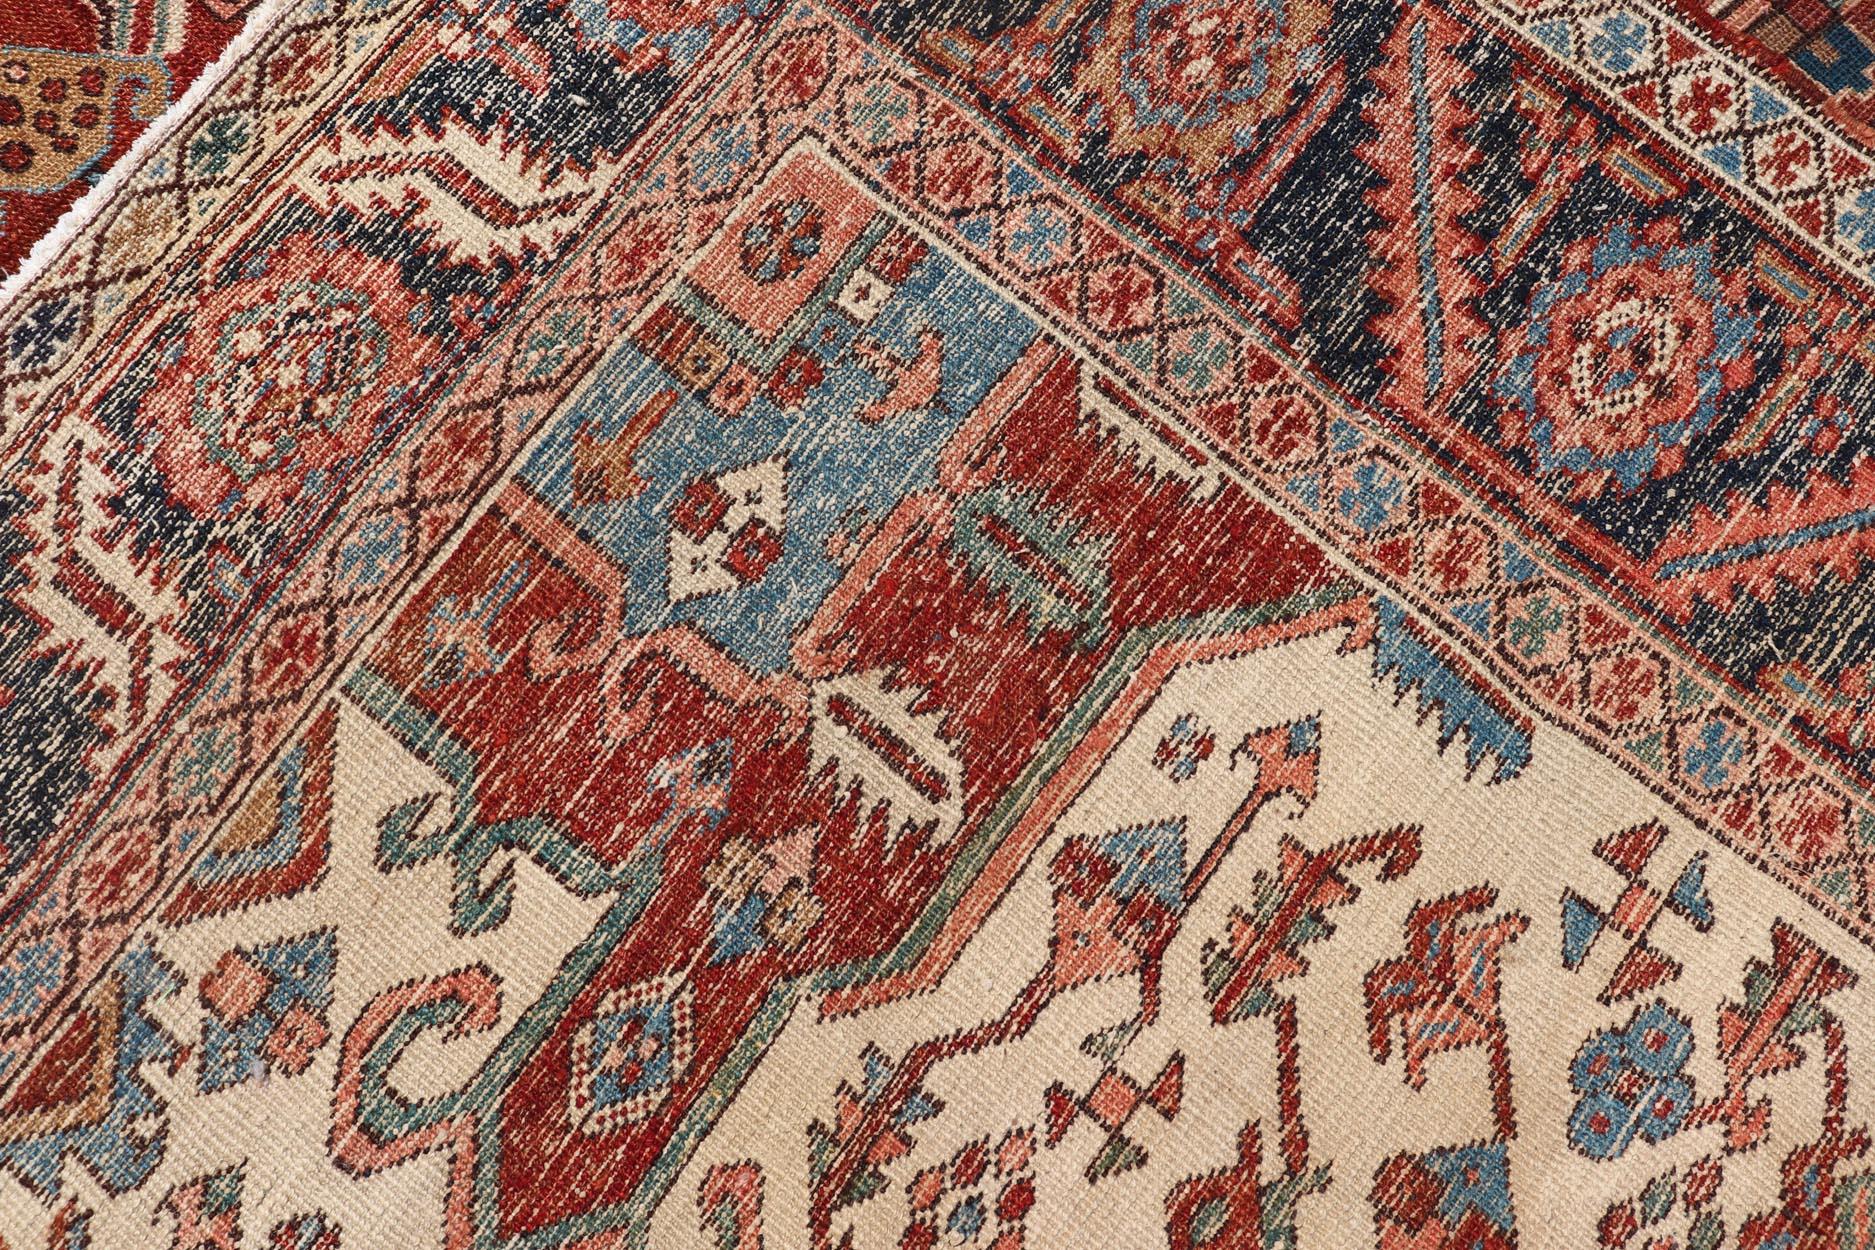 Early 20th Century Antique Persian Serapi Carpet with Stylized Geometric Motifs For Sale 9